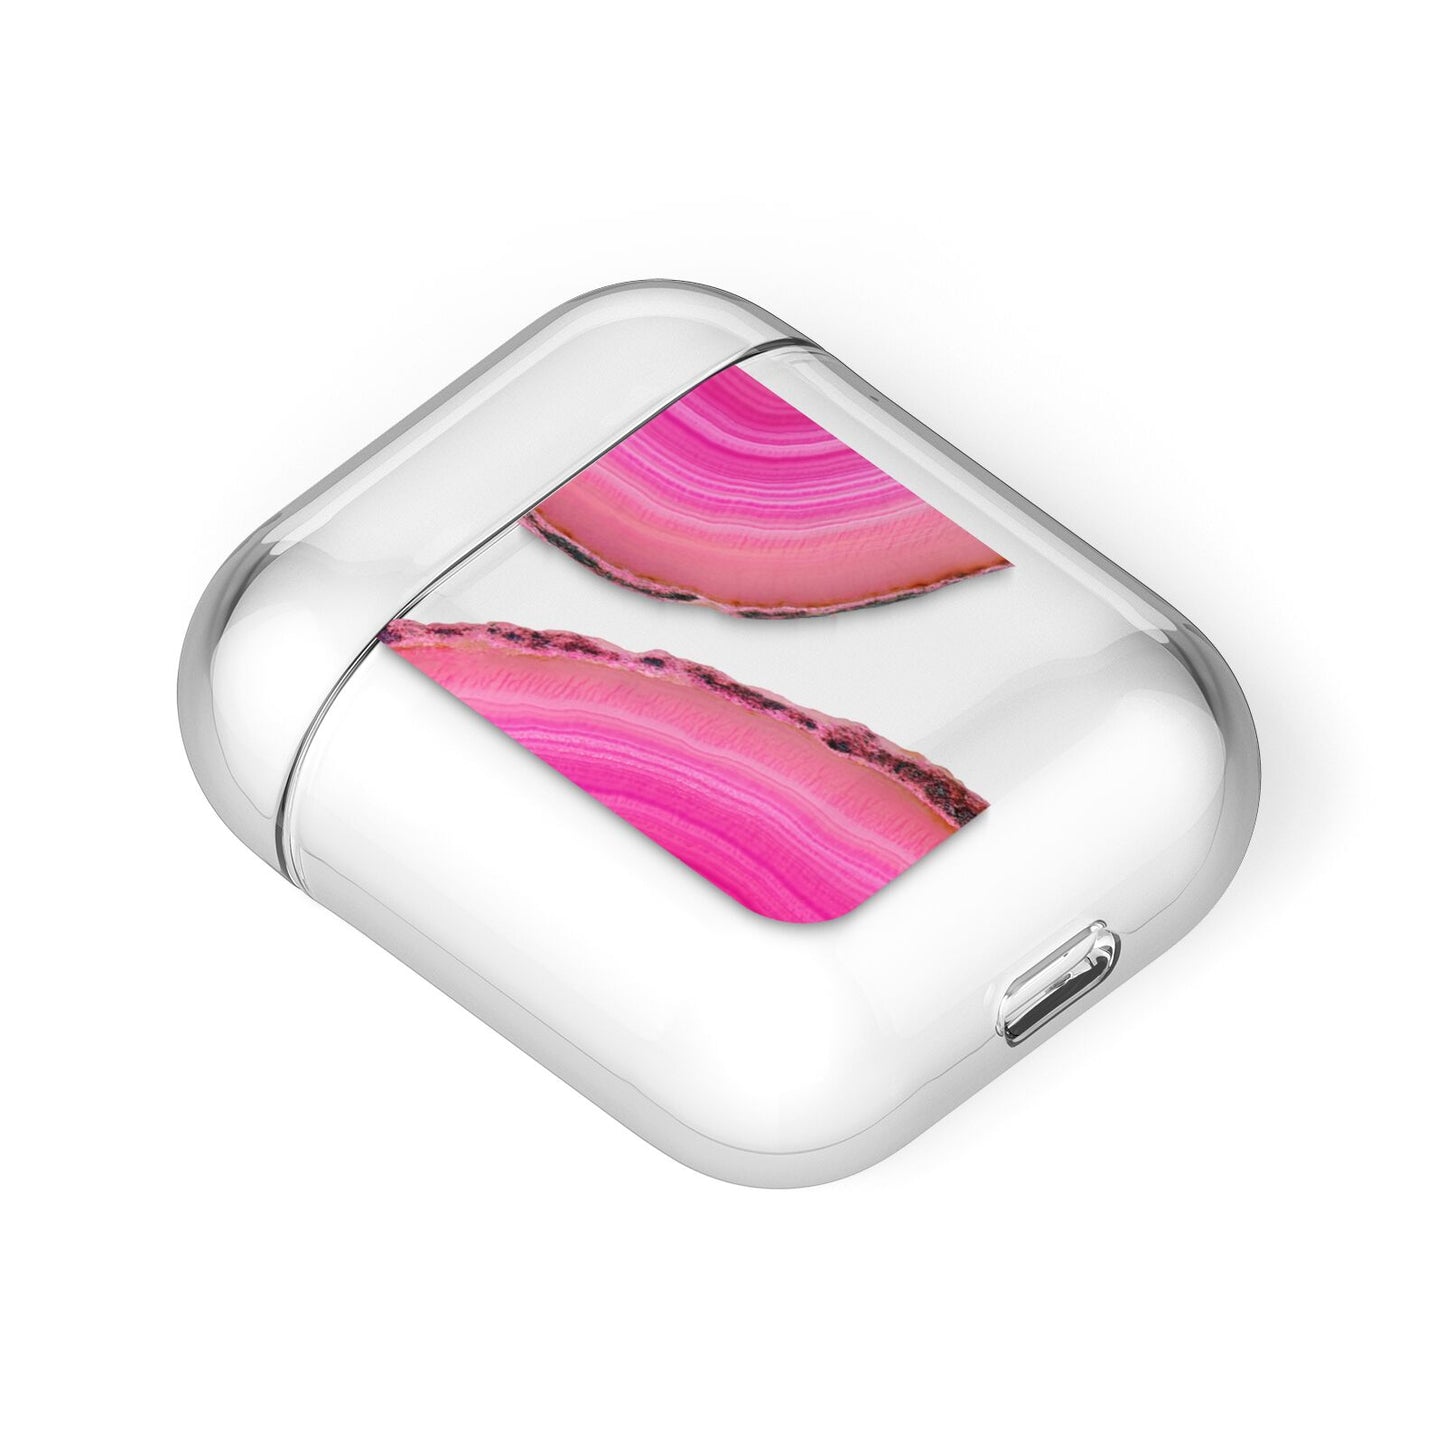 Agate Bright Pink AirPods Case Laid Flat